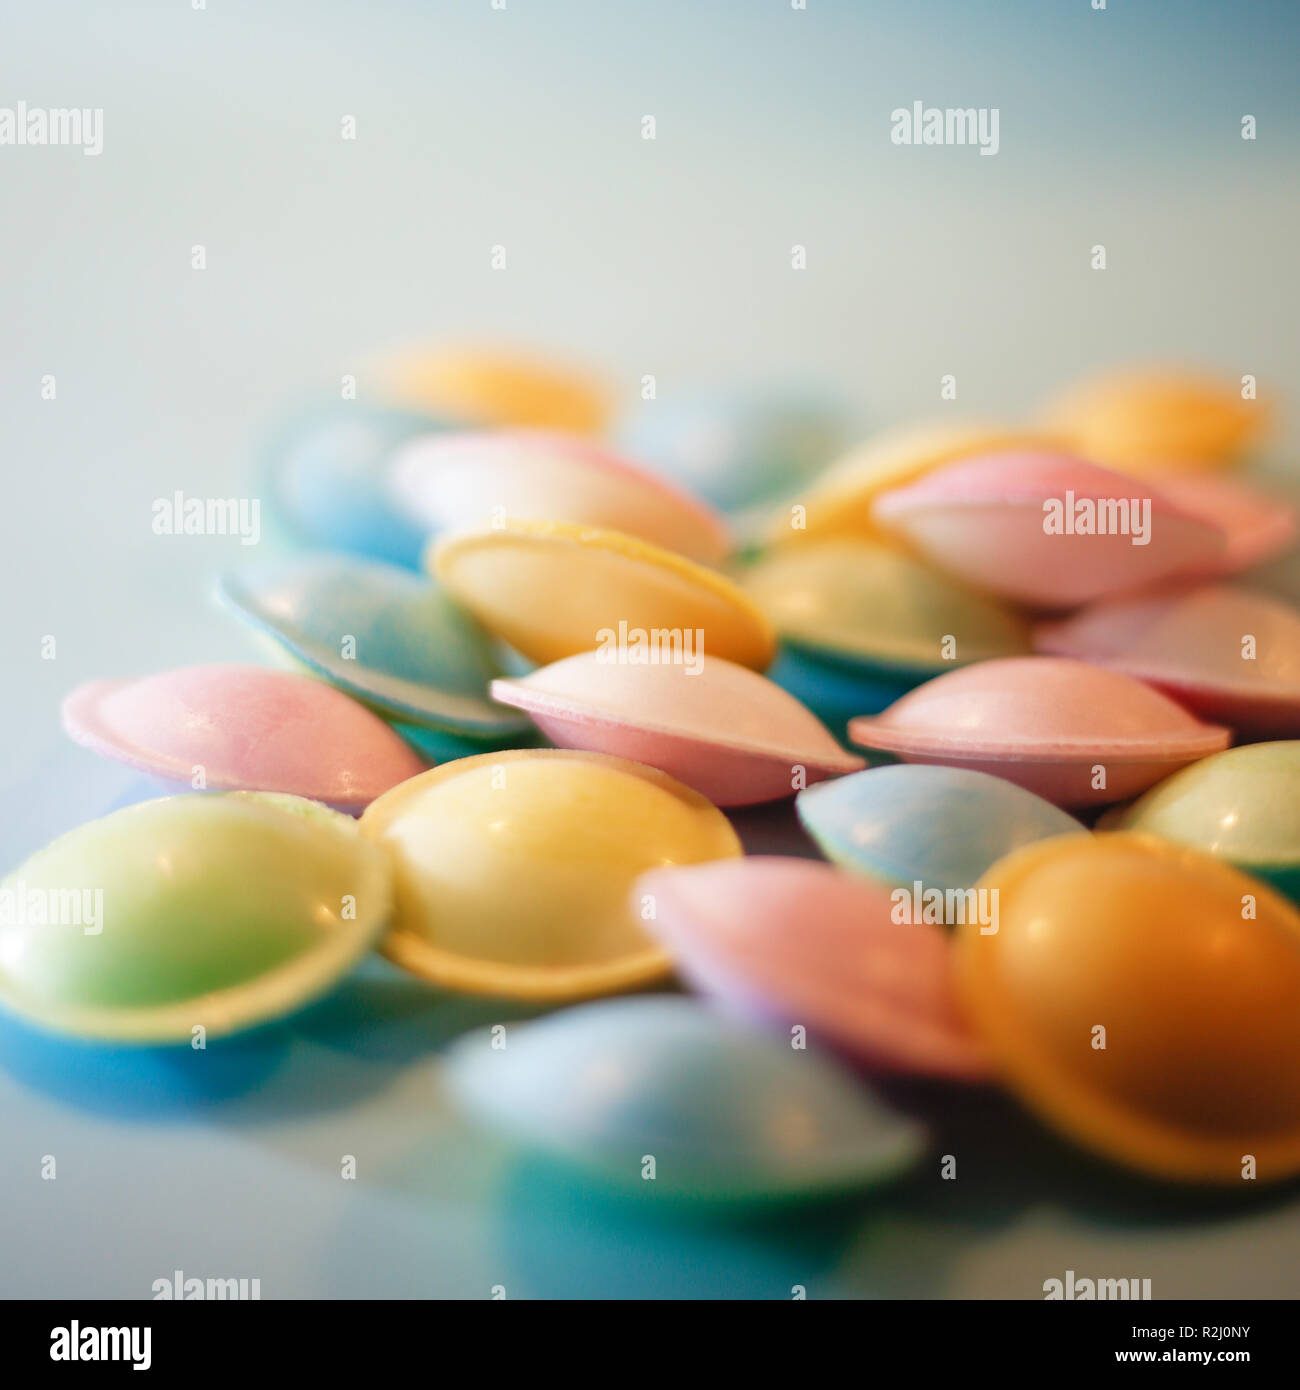 A pile of flying saucers Stock Photo